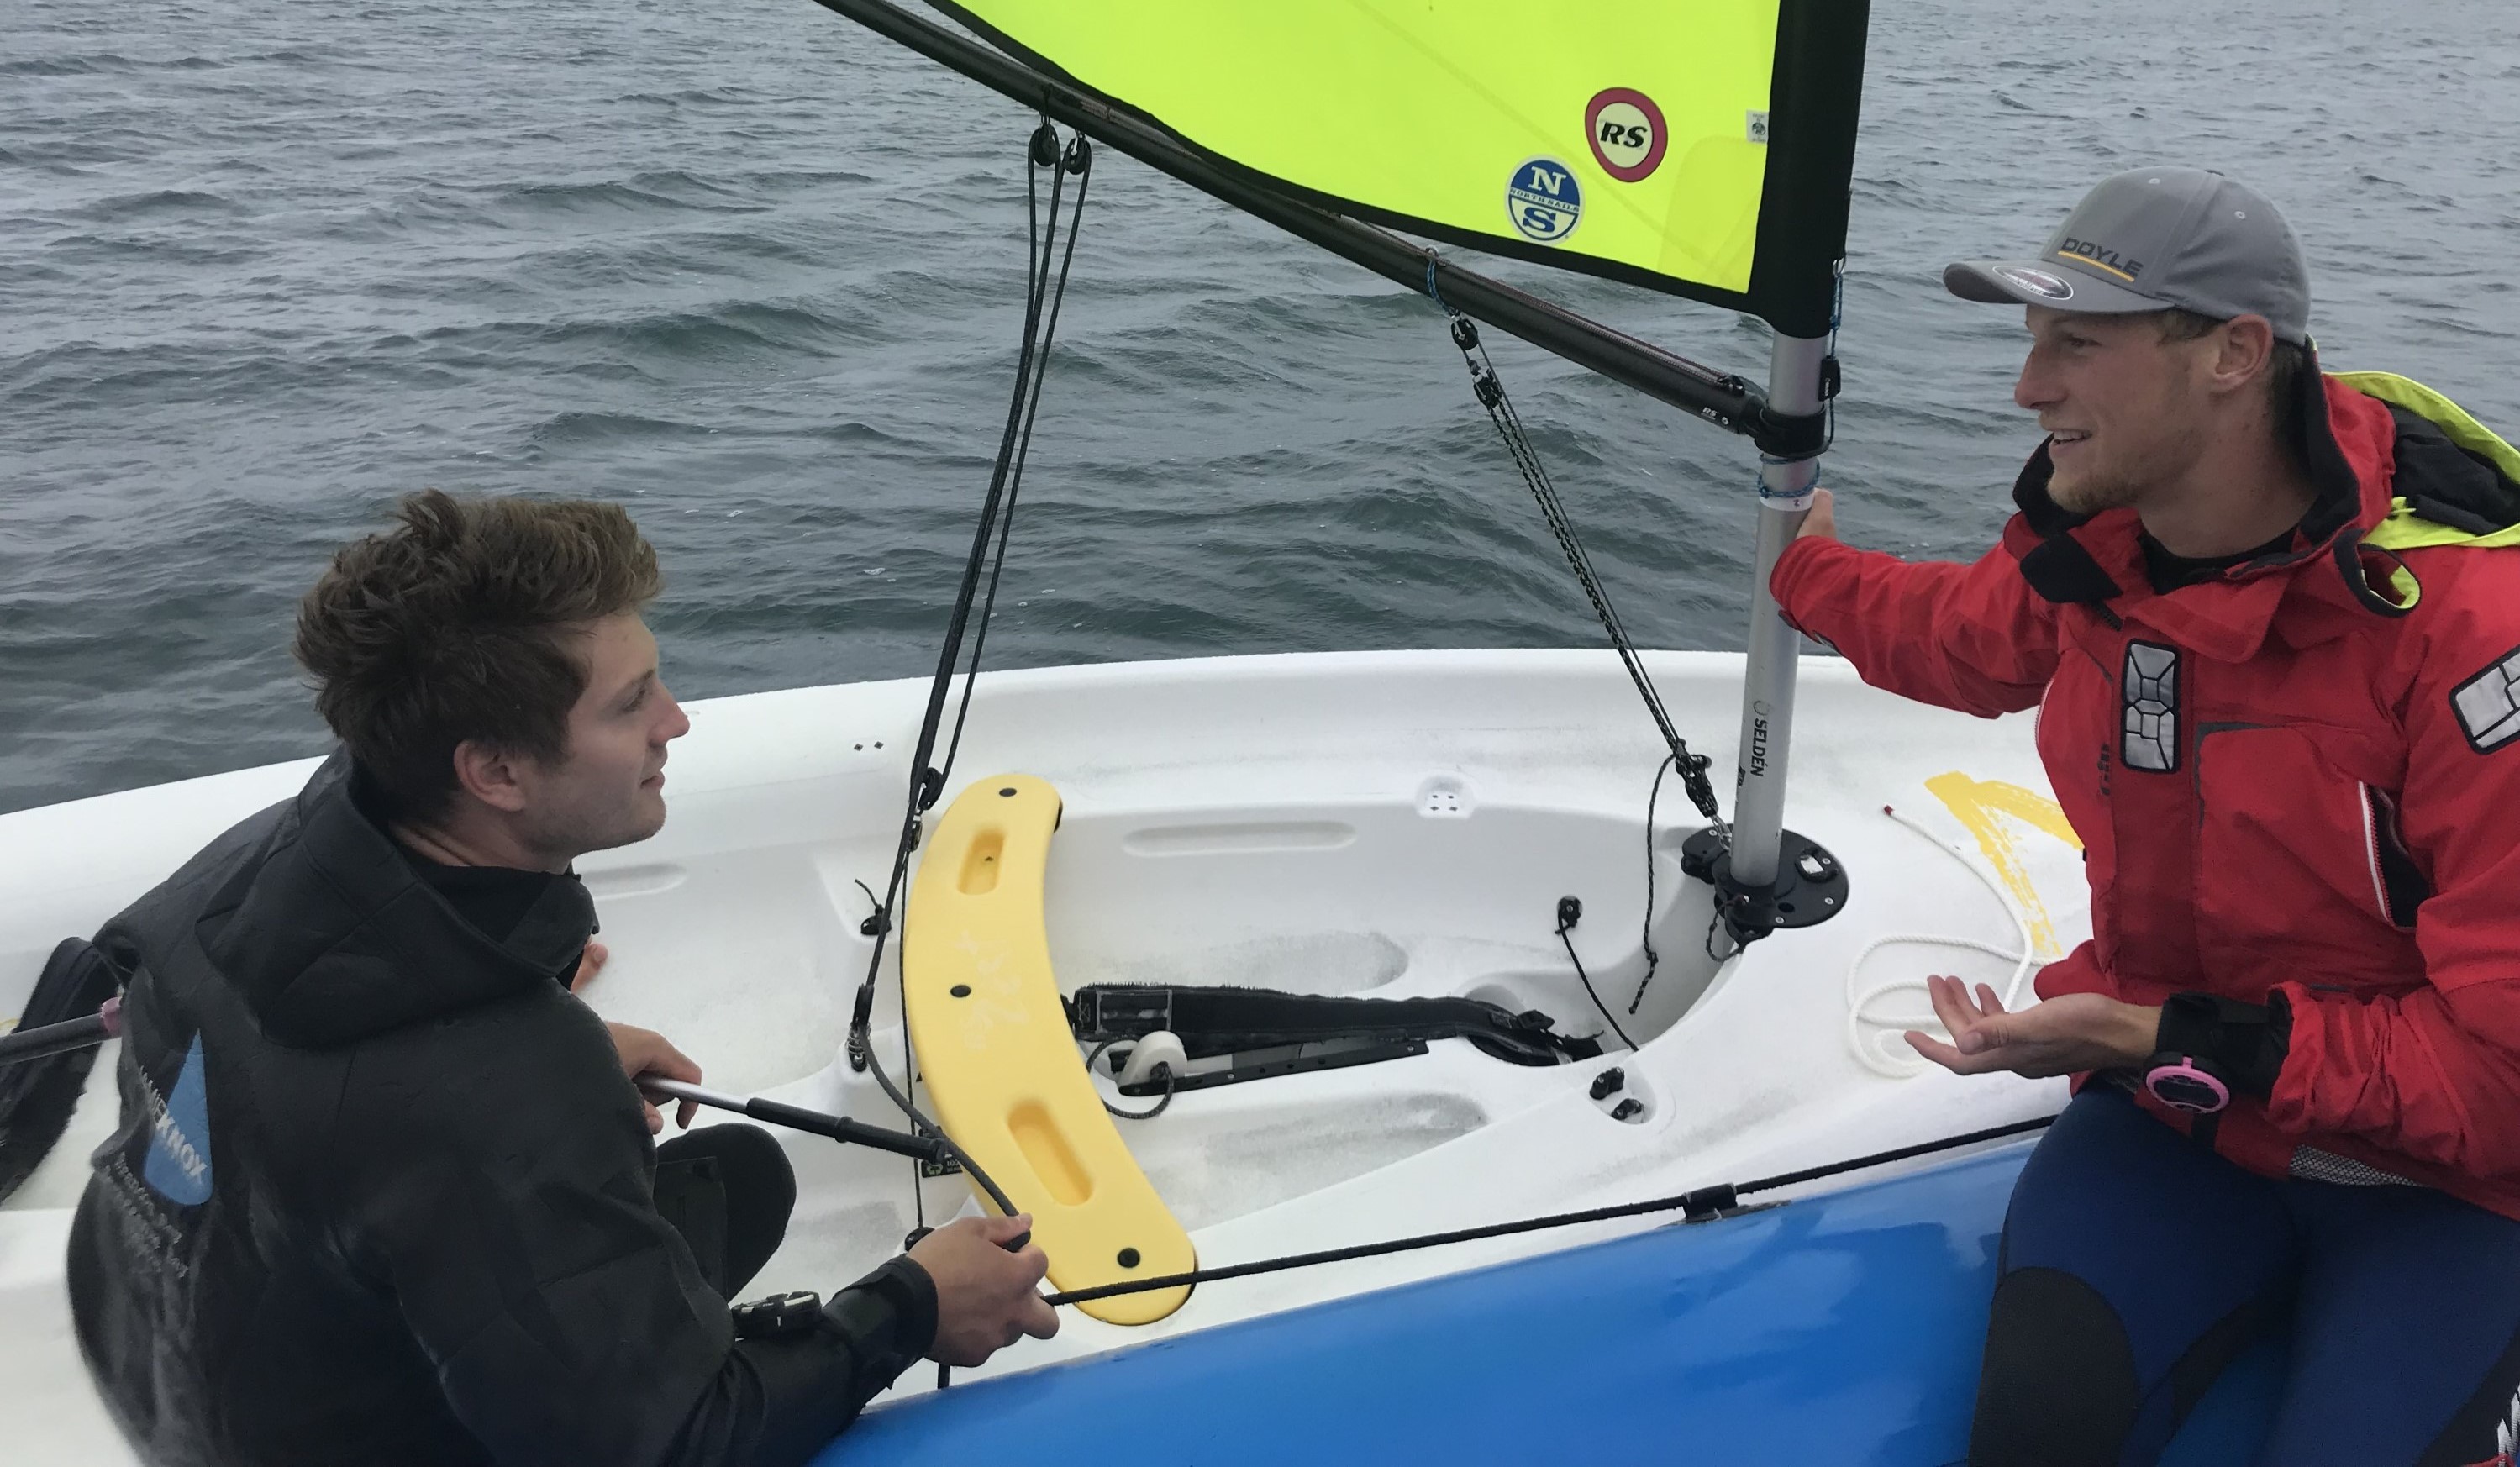 Sailor to Coach camp Summer 2022 L-R Andy & Alex on the water at WPNSA for a session as part of the RYA Race Coach Level 2 course.